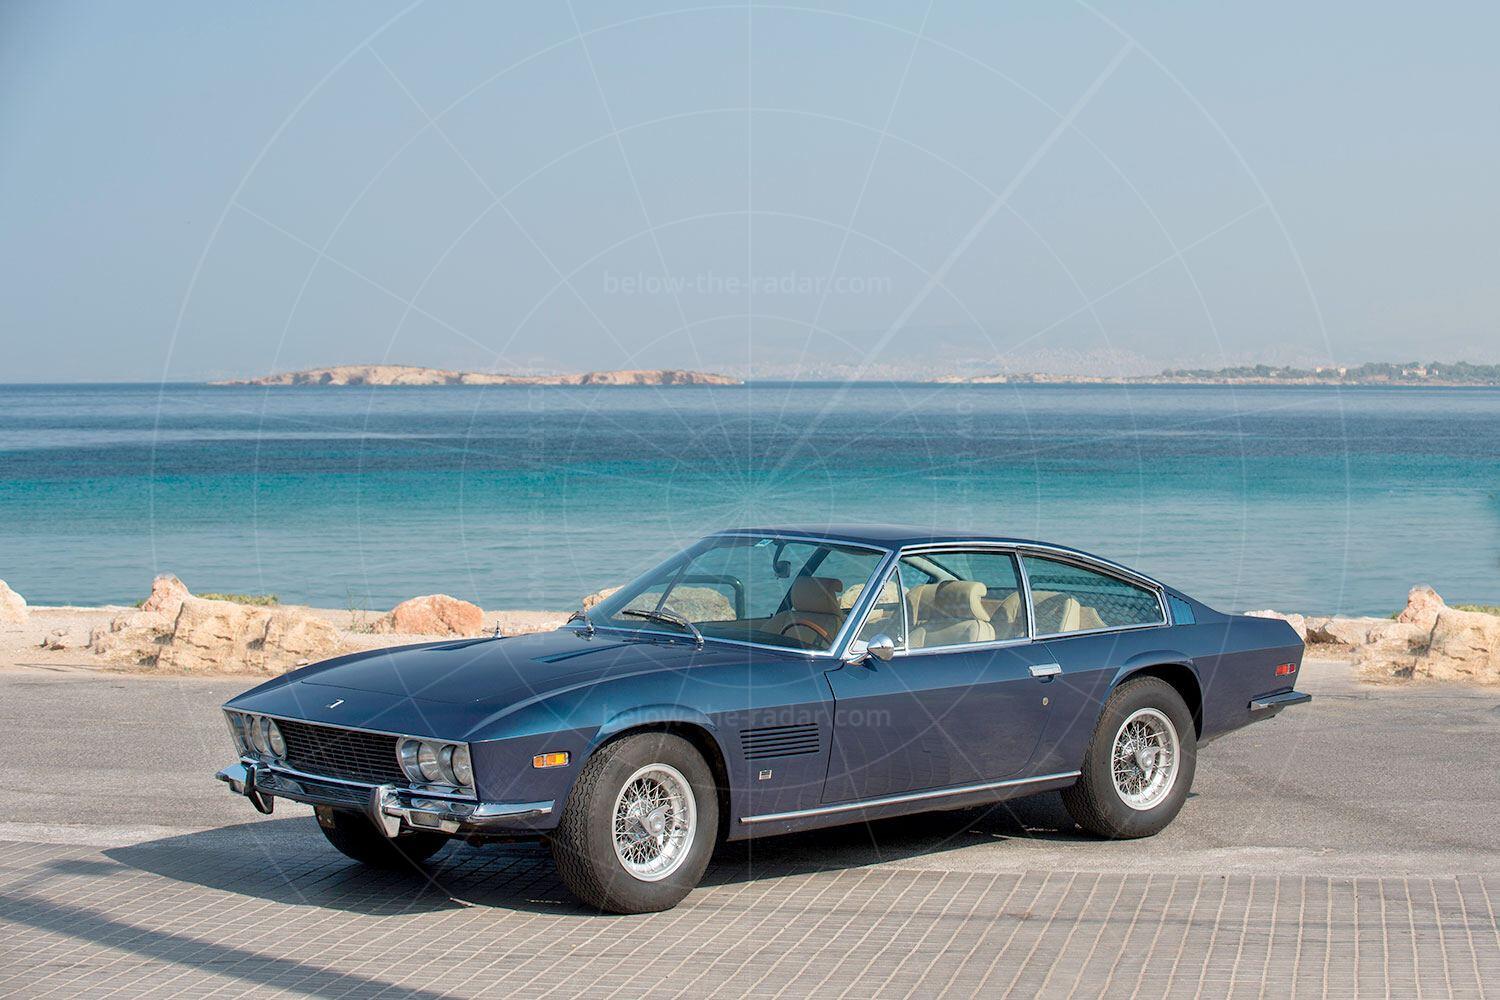 The Monteverdi High Speed 375 L Pic: RM Sotheby's | The Monteverdi High Speed 375 L